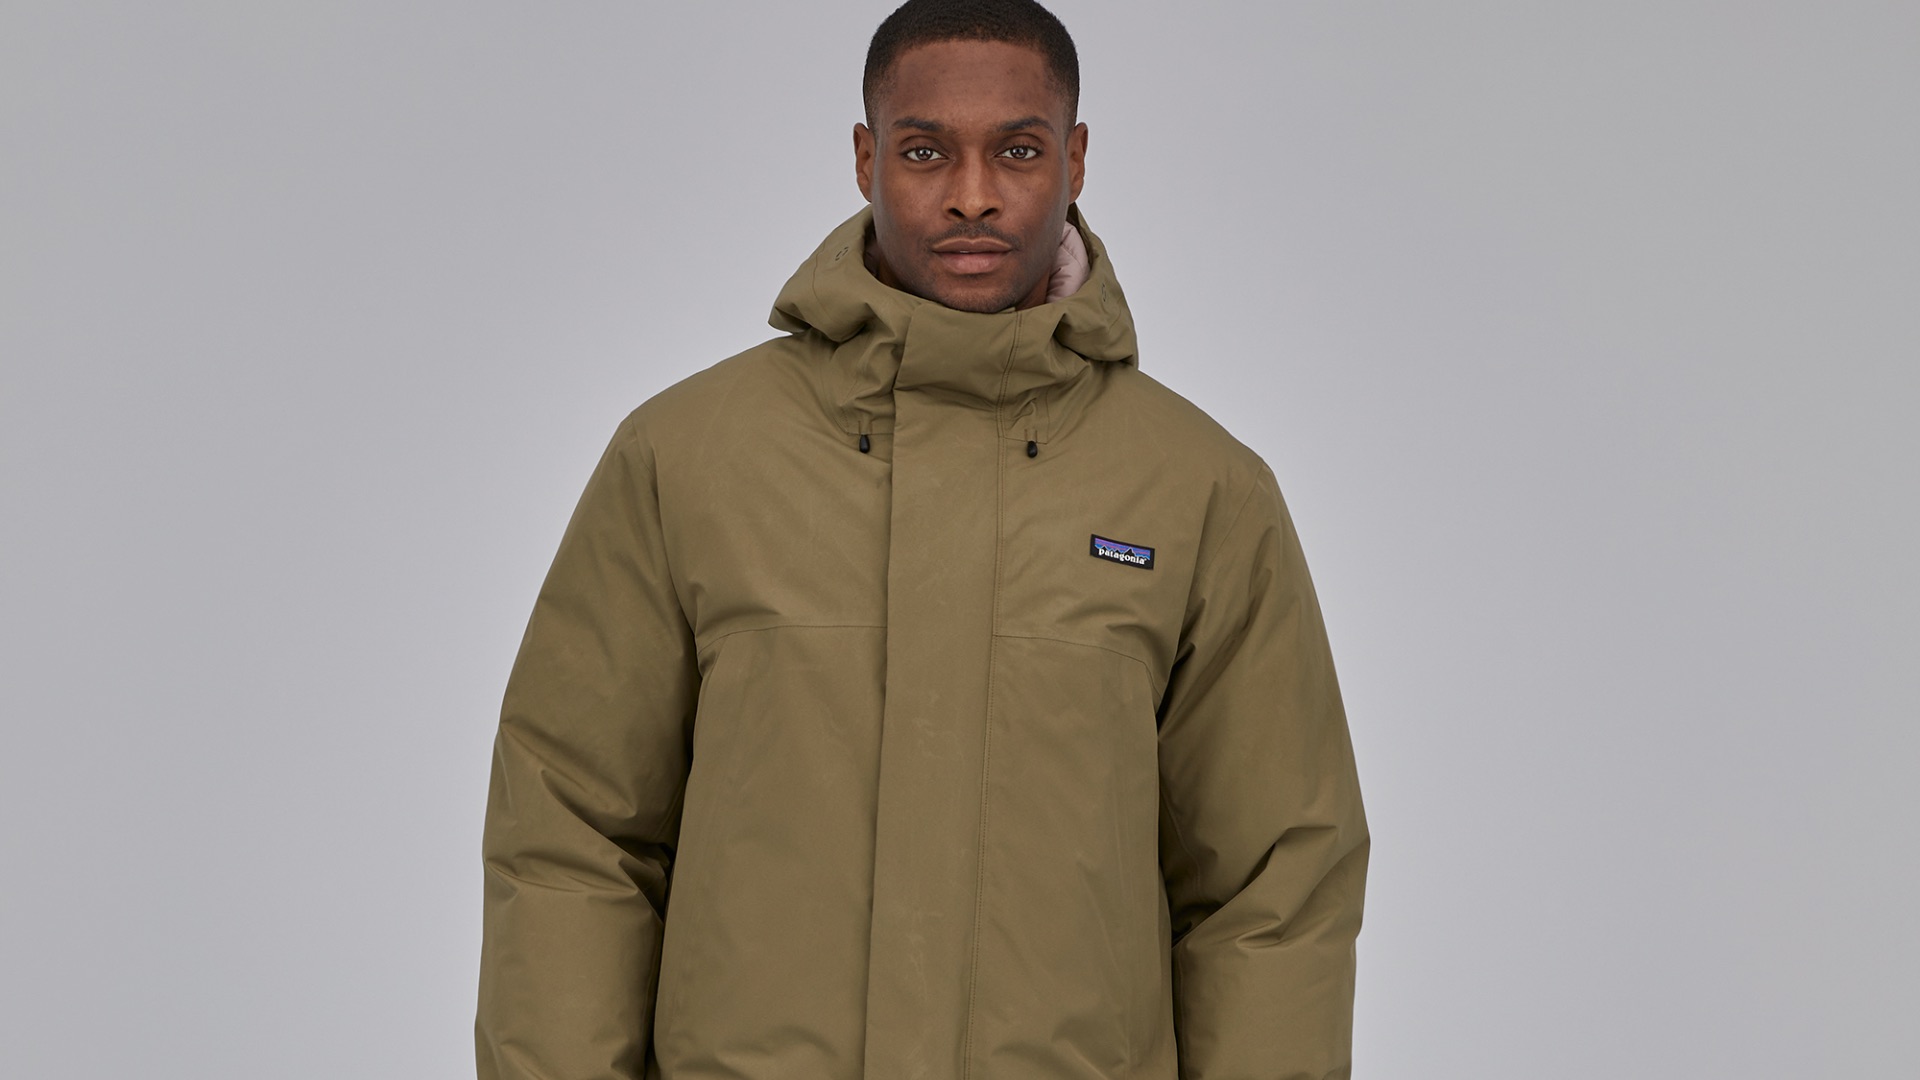 This new Patagonia jacket is the first GORE-TEX jacket to feature 100%  recycled, pfc-free GORE-TEX fabrics - The Manual